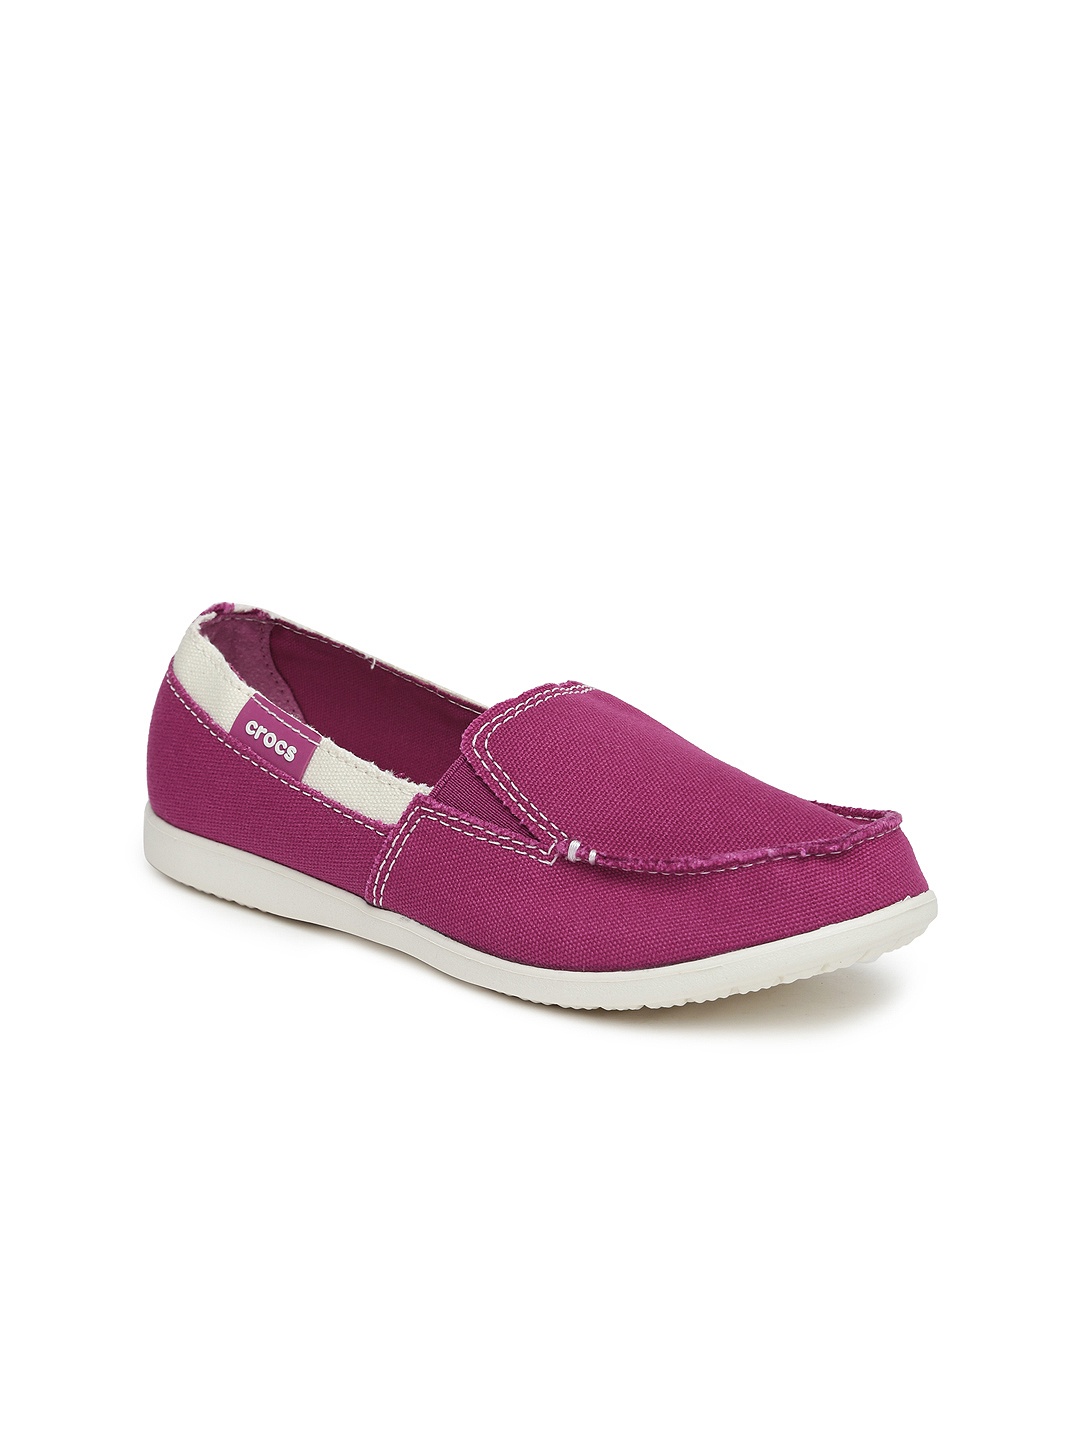 Crocs Women Pink Loafers price Myntra. Loafers Deals at Myntra. Crocs ...